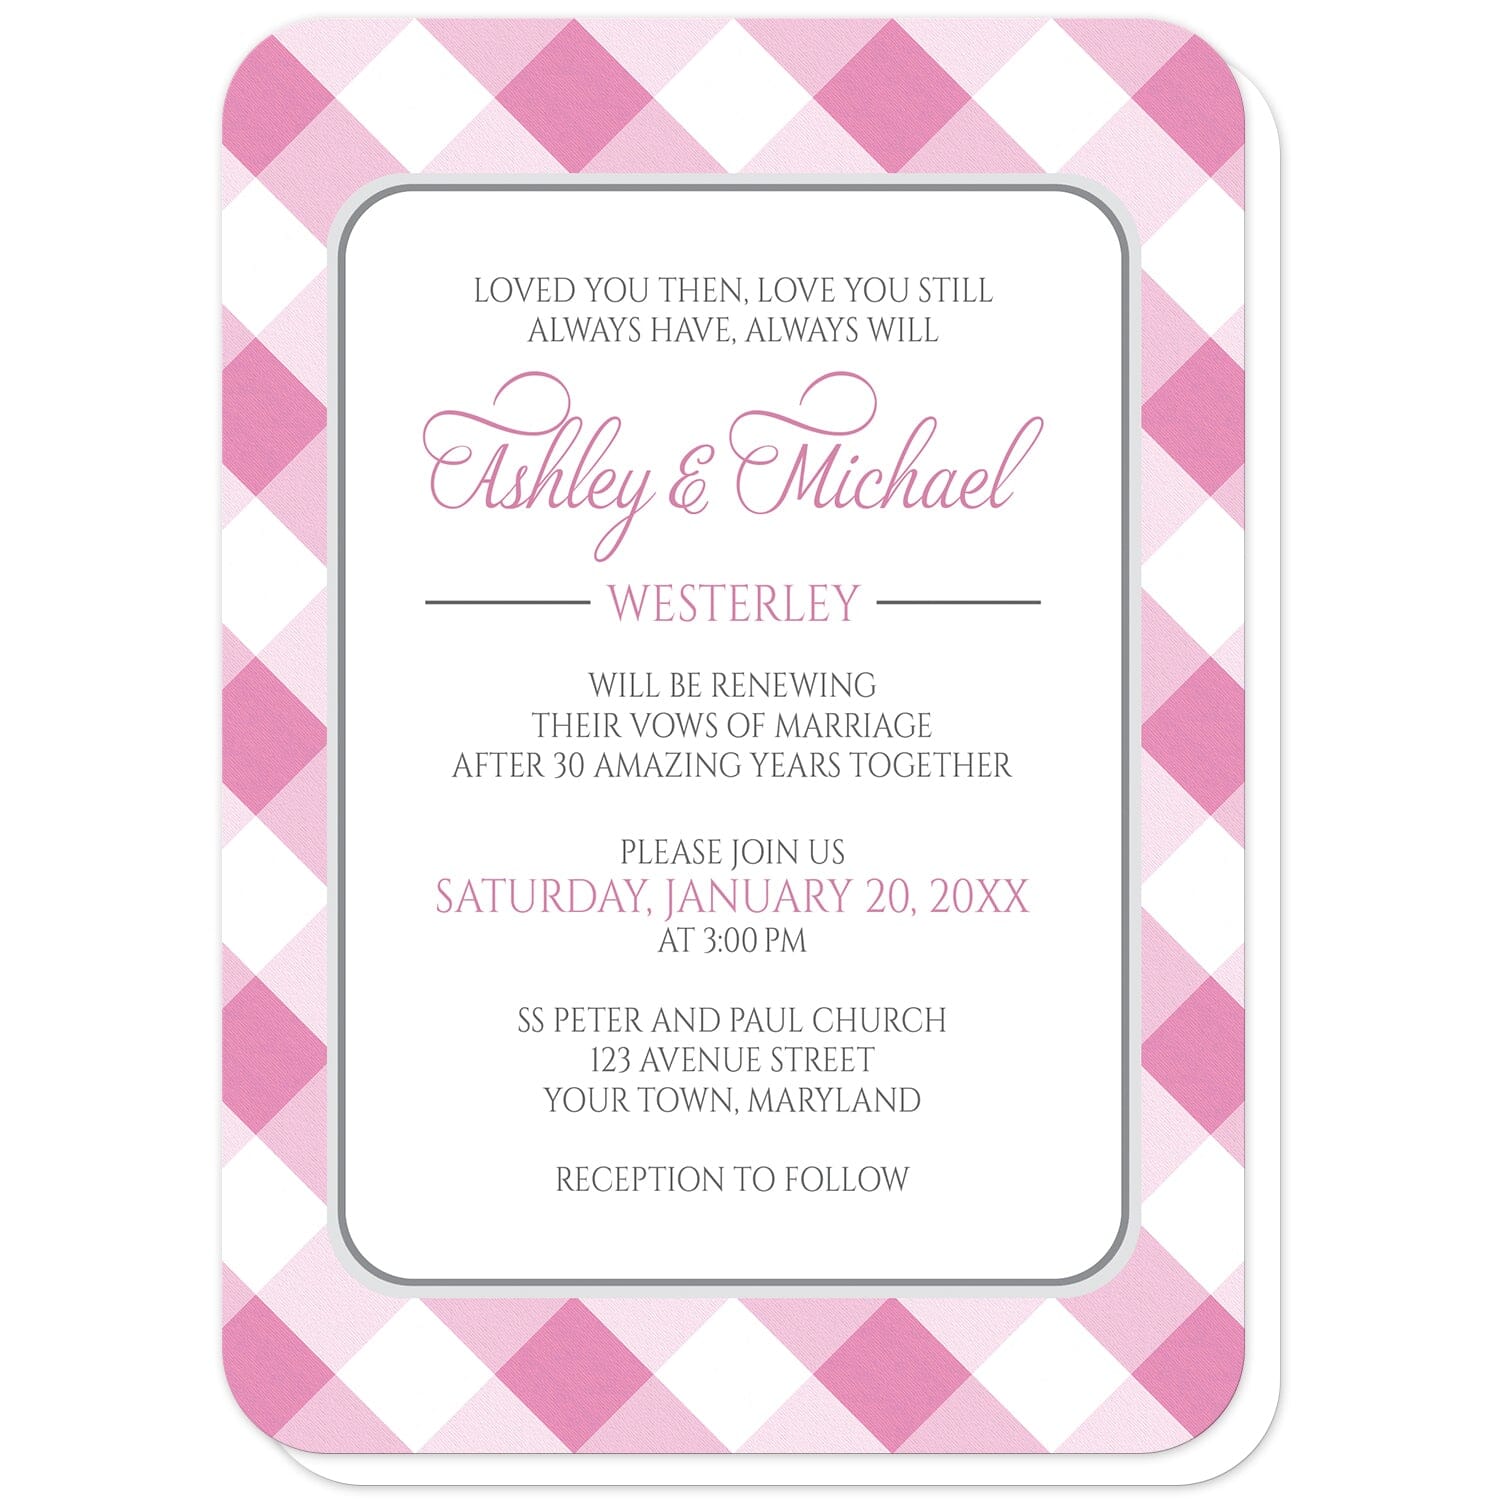 Pink Gingham Vow Renewal Invitations (with rounded corners) at Artistically Invited. Pink gingham vow renewal invitations with your personalized ceremony details custom printed in pink and gray inside a white rectangular area outlined in gray. The background design is a diagonal pink and white gingham pattern. 